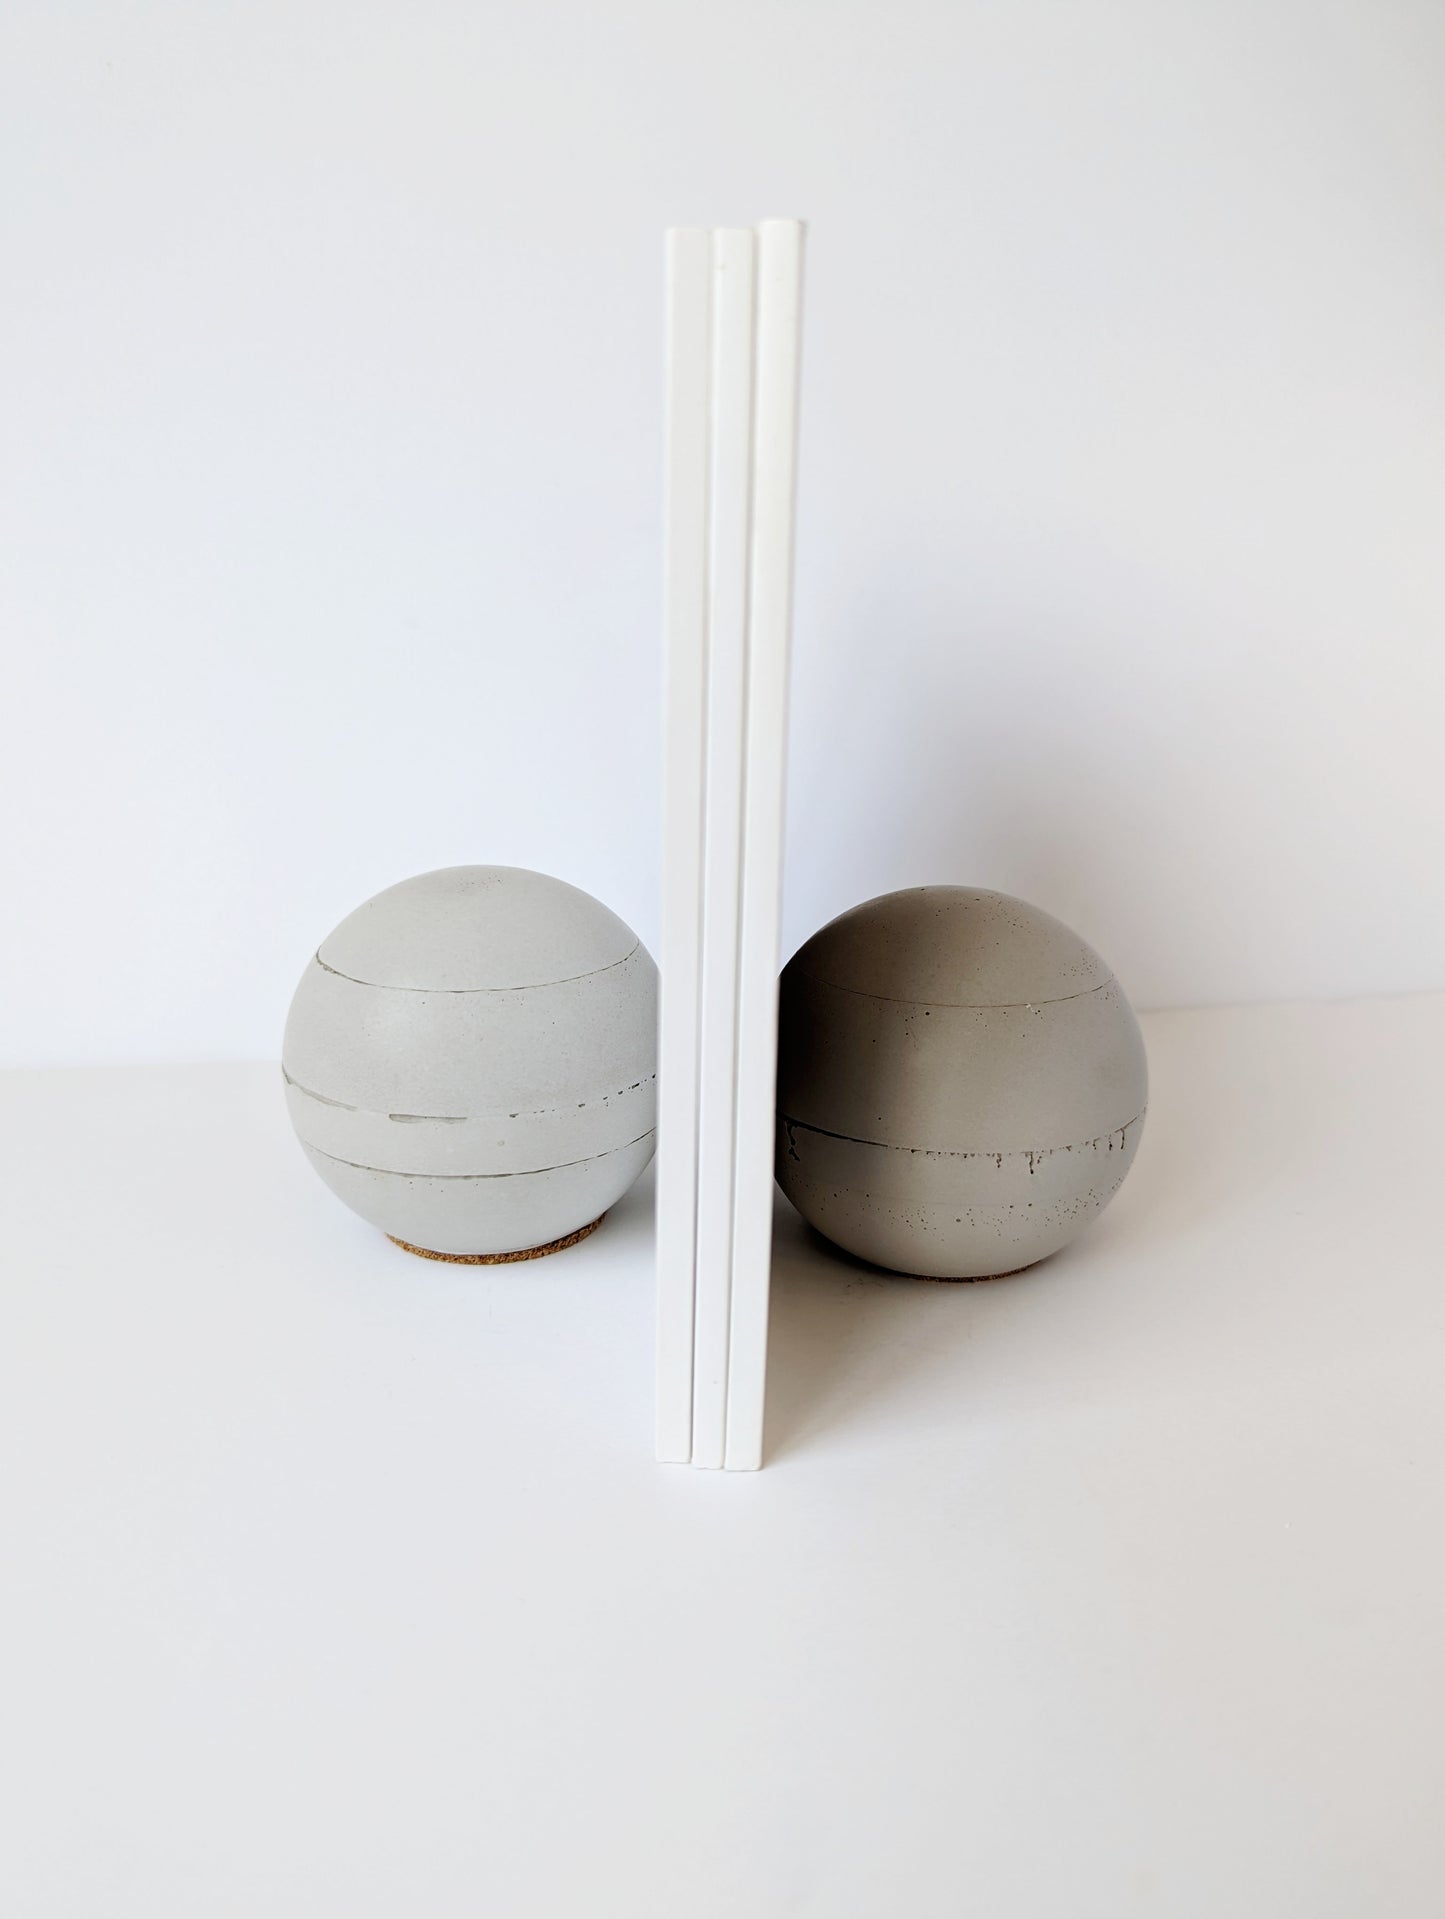 No-Waste Concrete Paperweight or Bookend